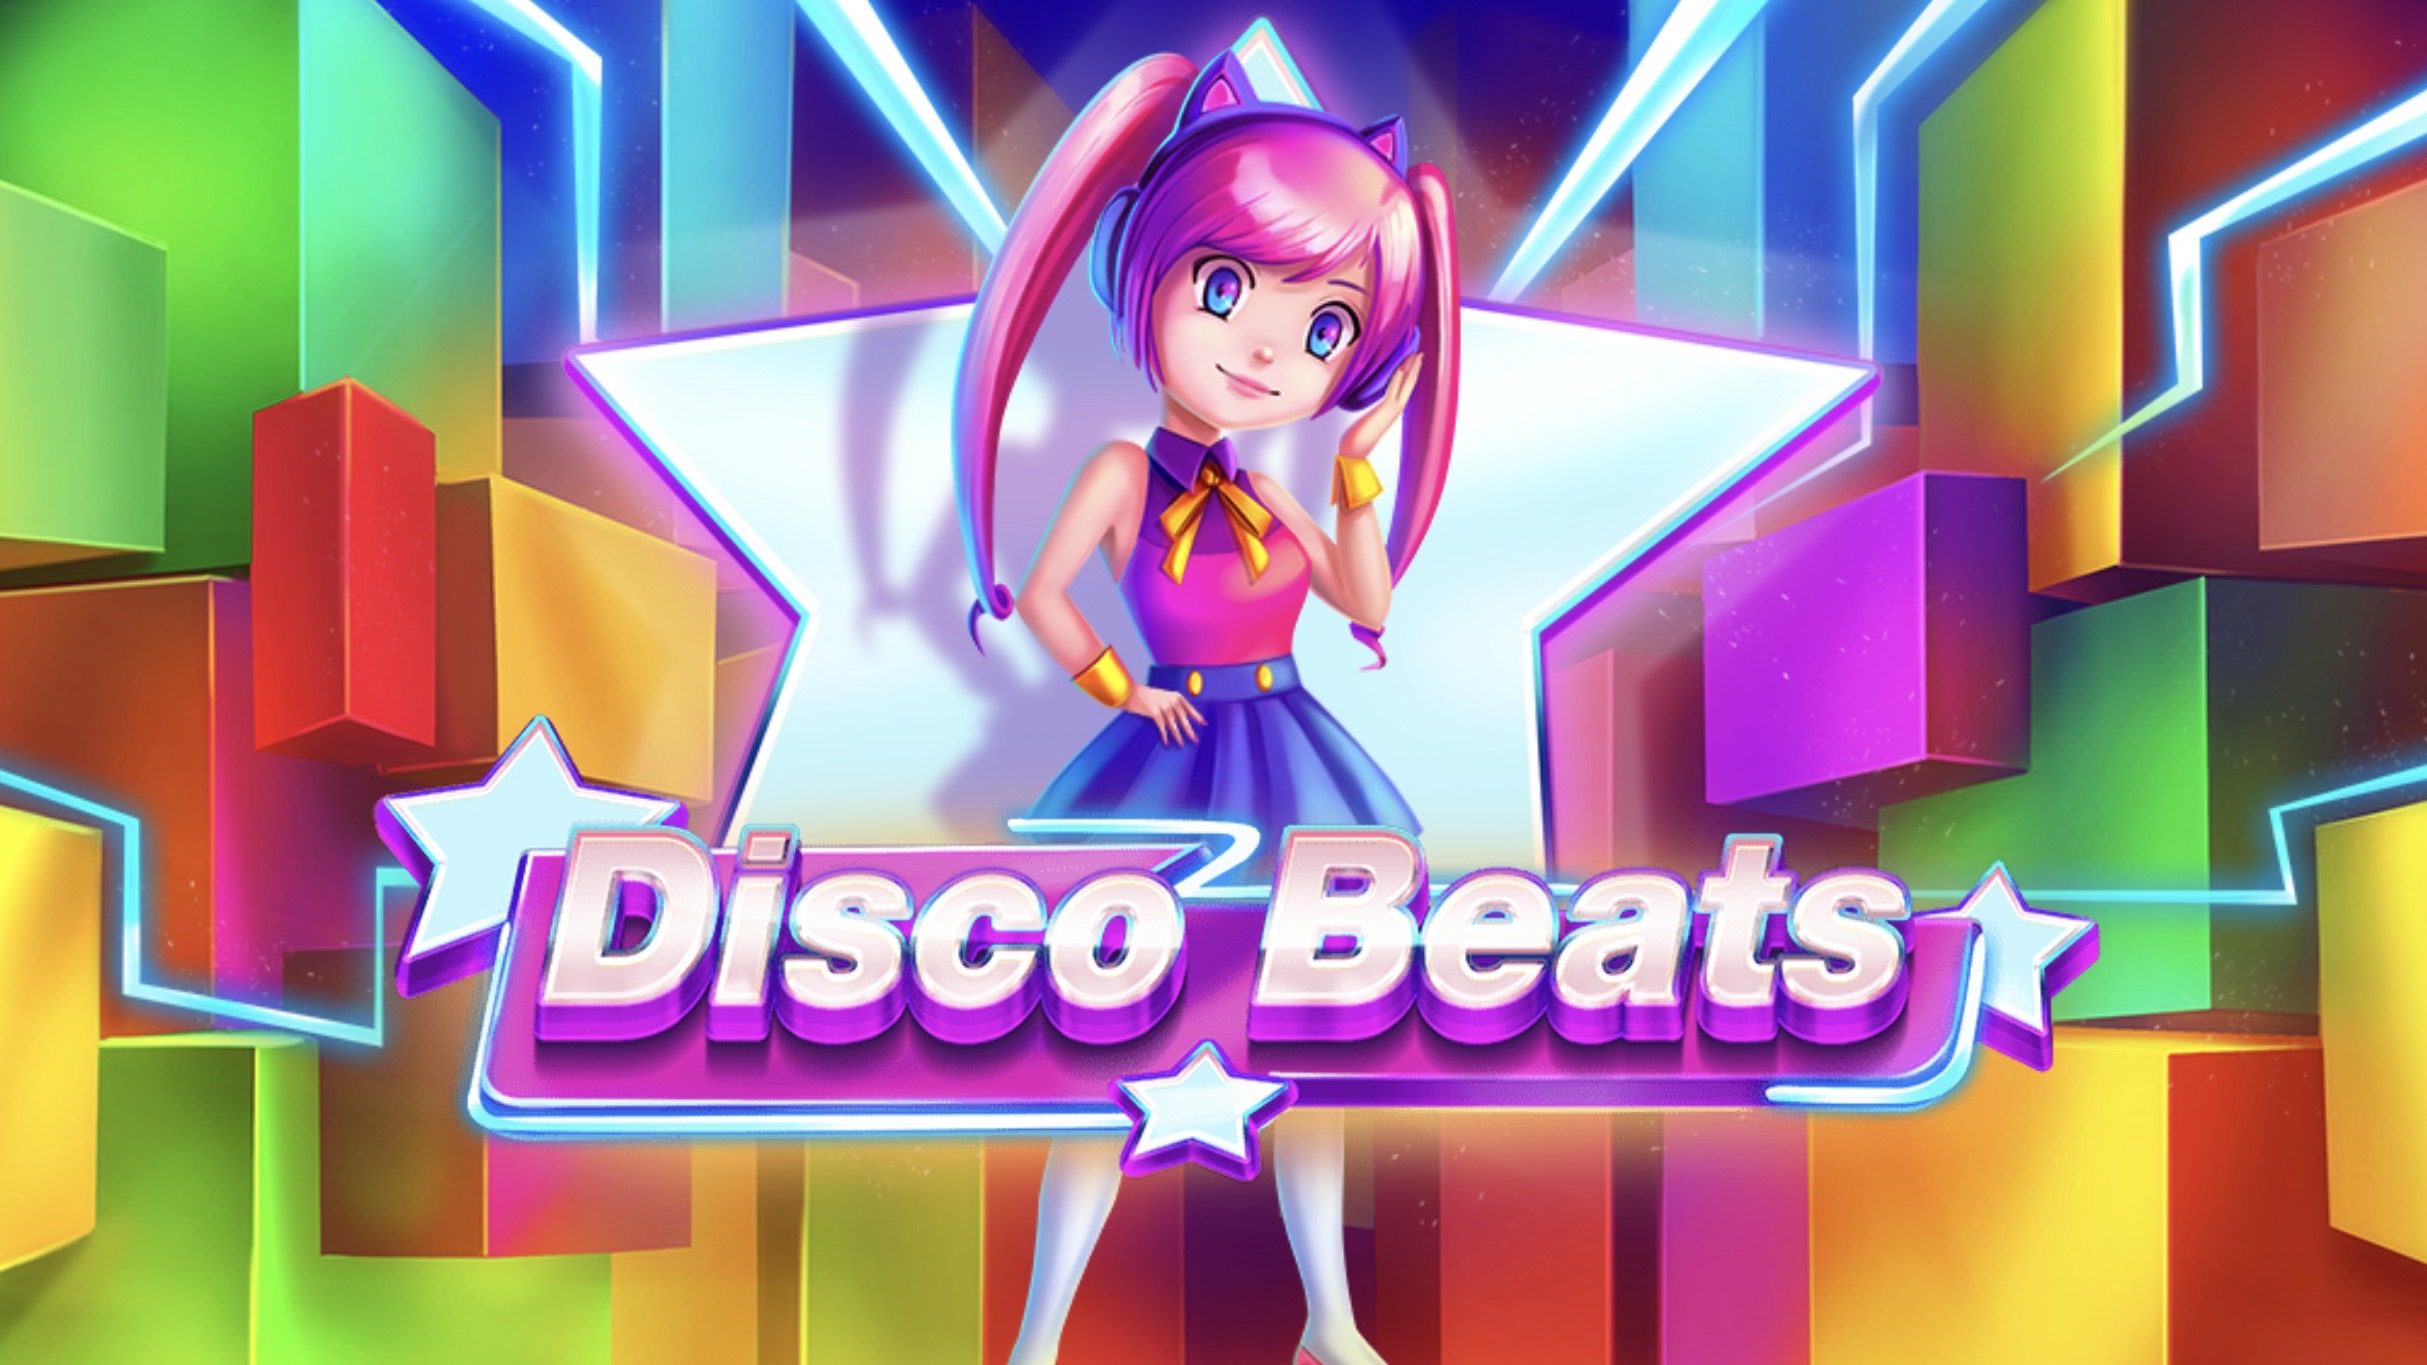 Disco Beats is a 3x3, 27-payline video slot that incorporates a maximum win potential of up to x10,000 the bet.